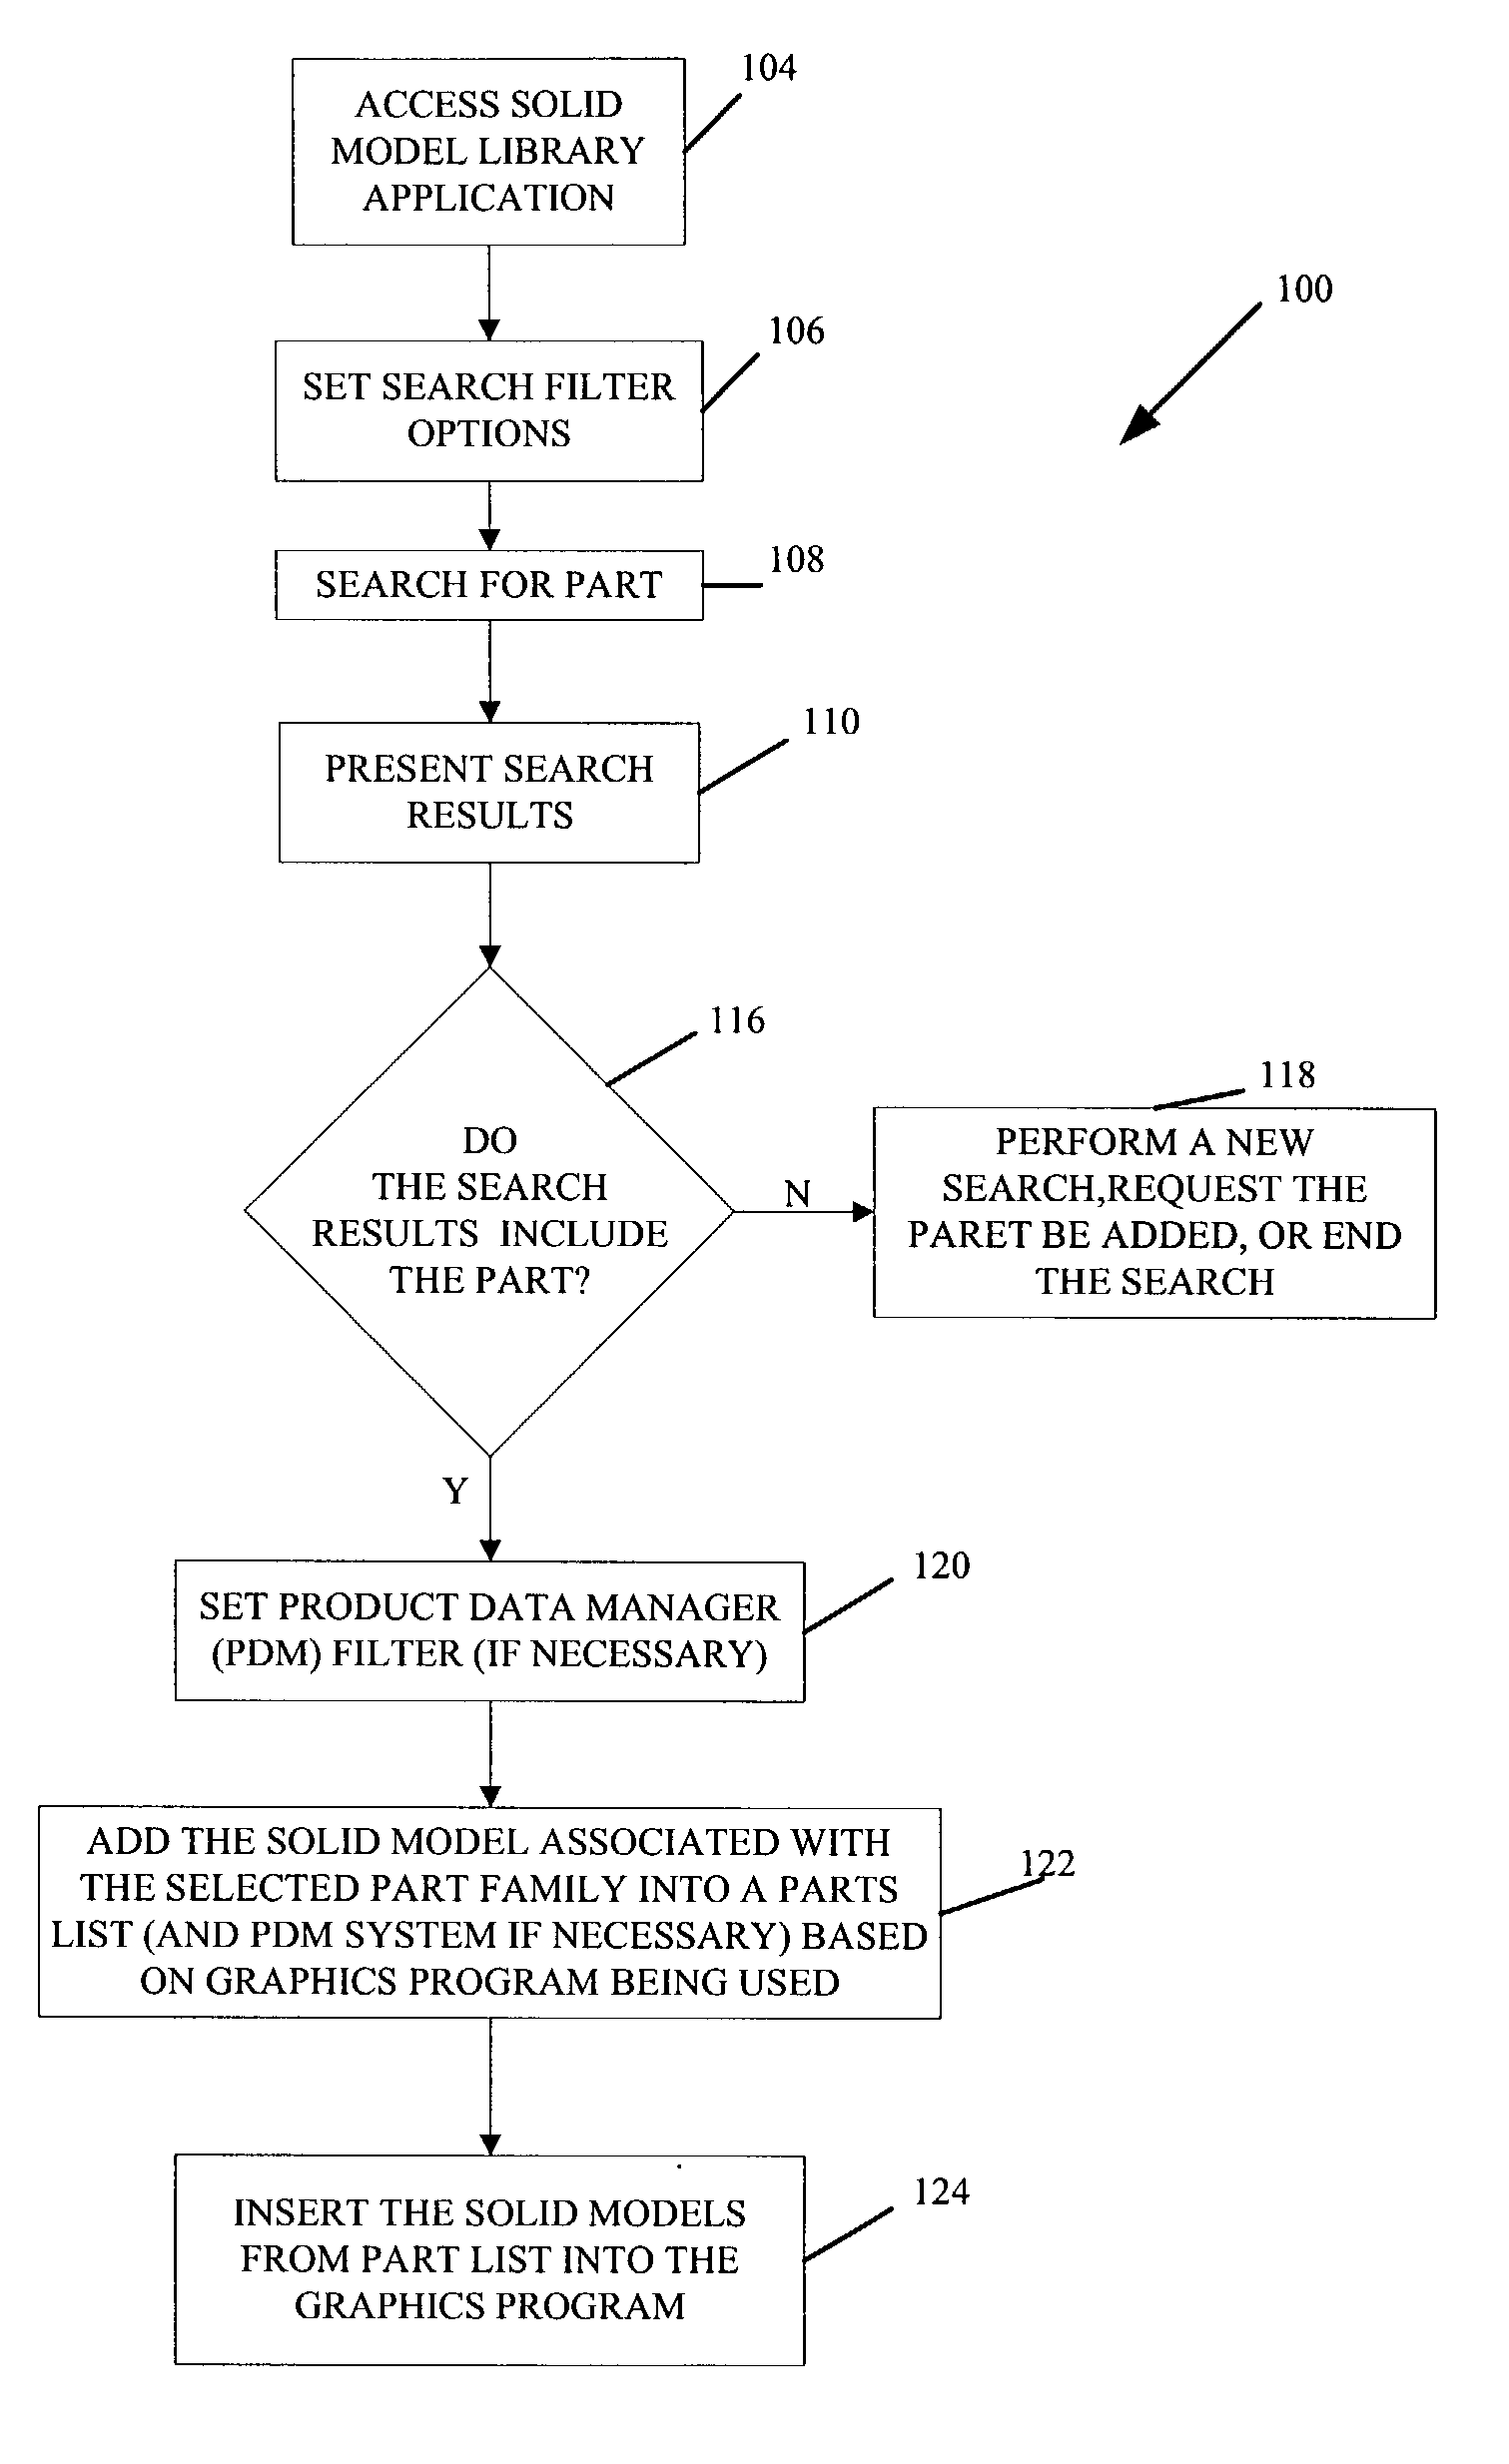 Central based computer network of solid models and associated data with search capability